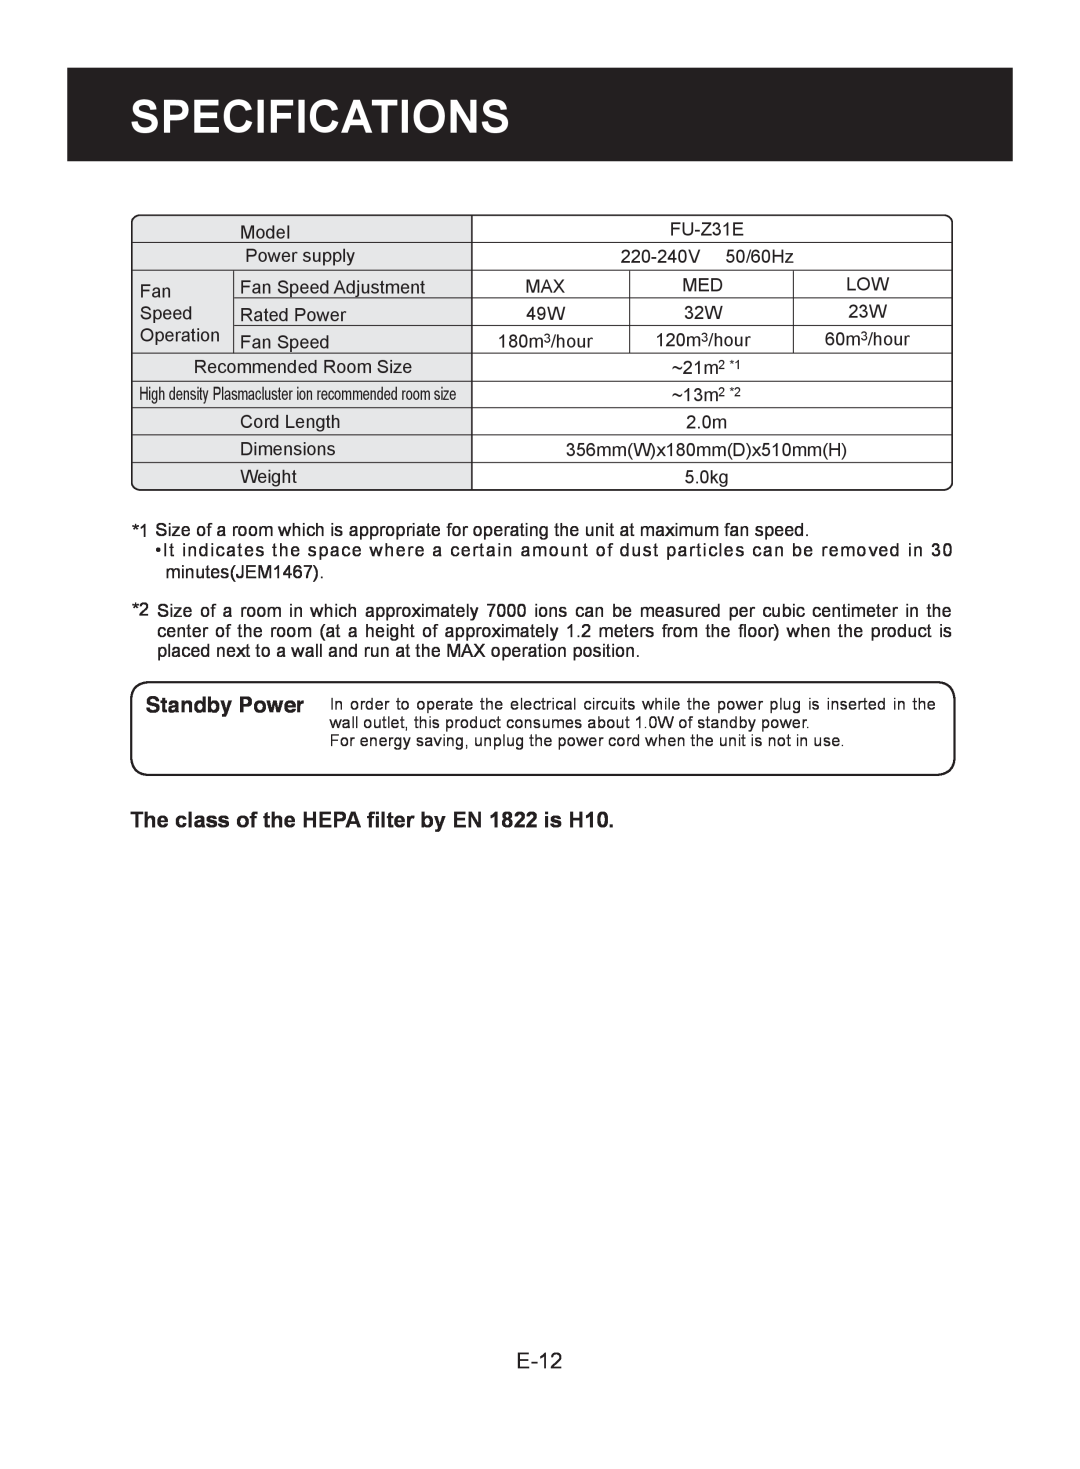 Sharp FU-Z31E operation manual Specifications, E-12, The class of the HEPA filter by EN 1822 is H10 